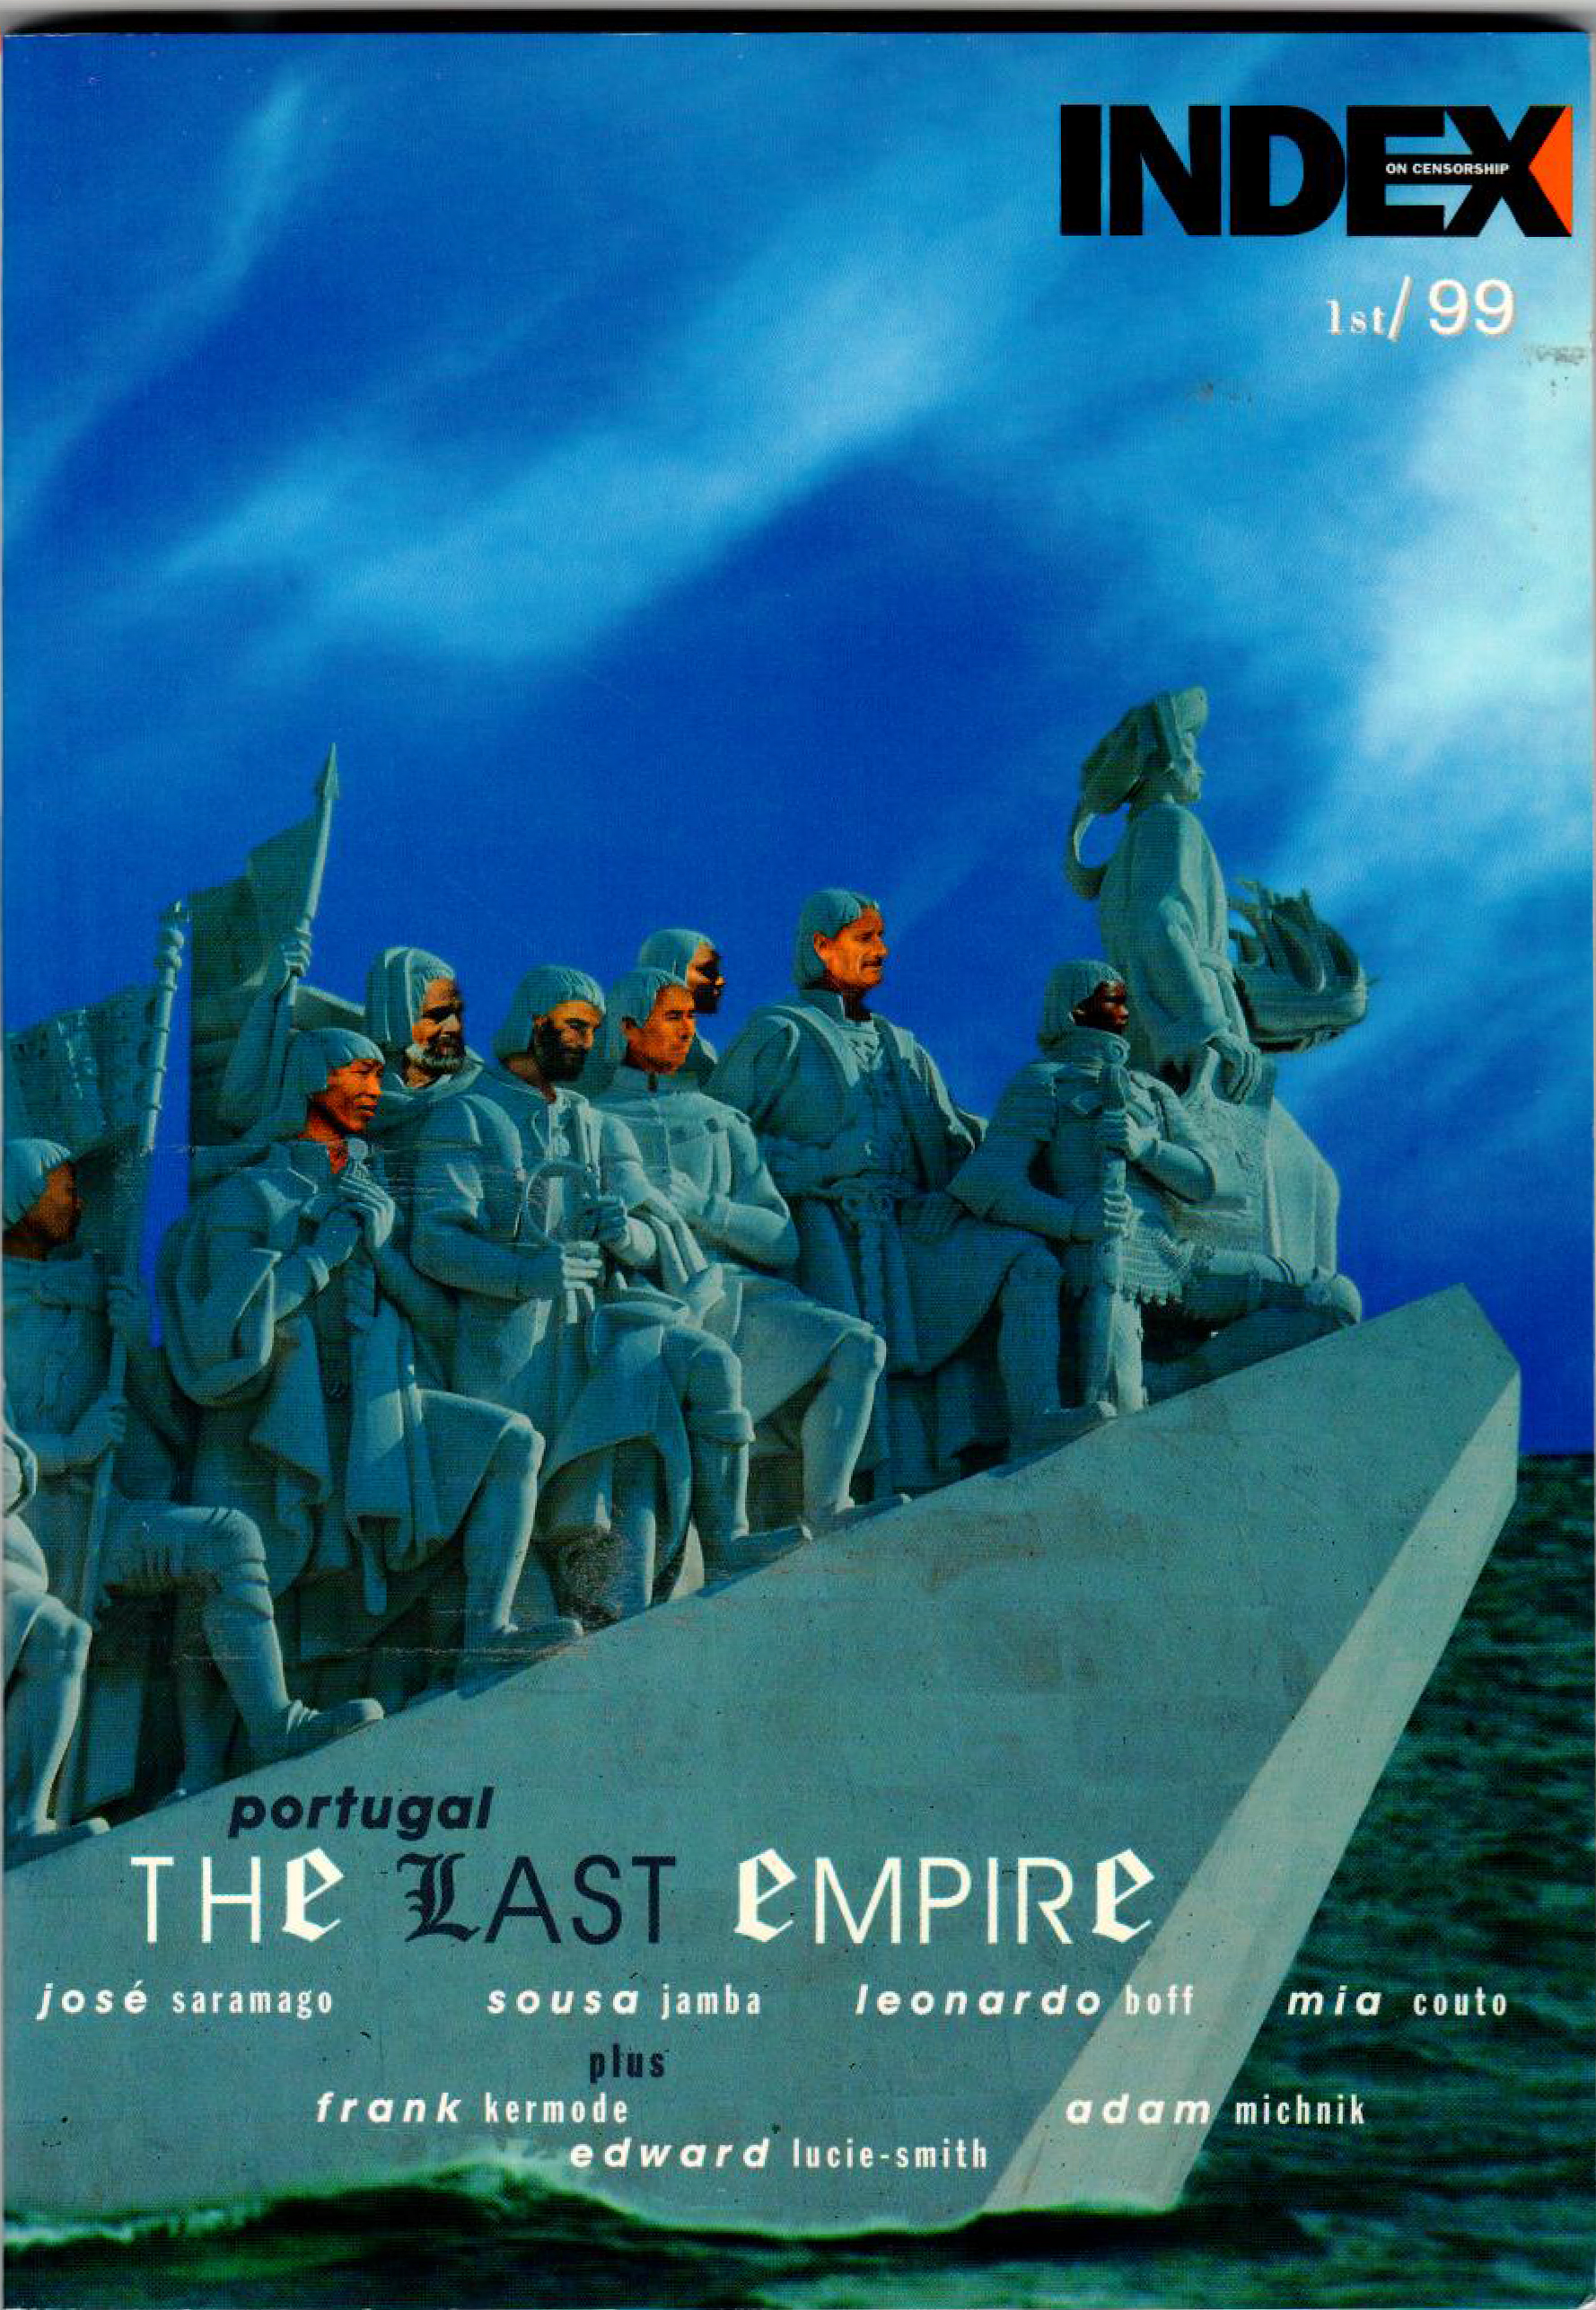 Portugal: The last empire, the January 1999 edition of Index on Censorship magazine.